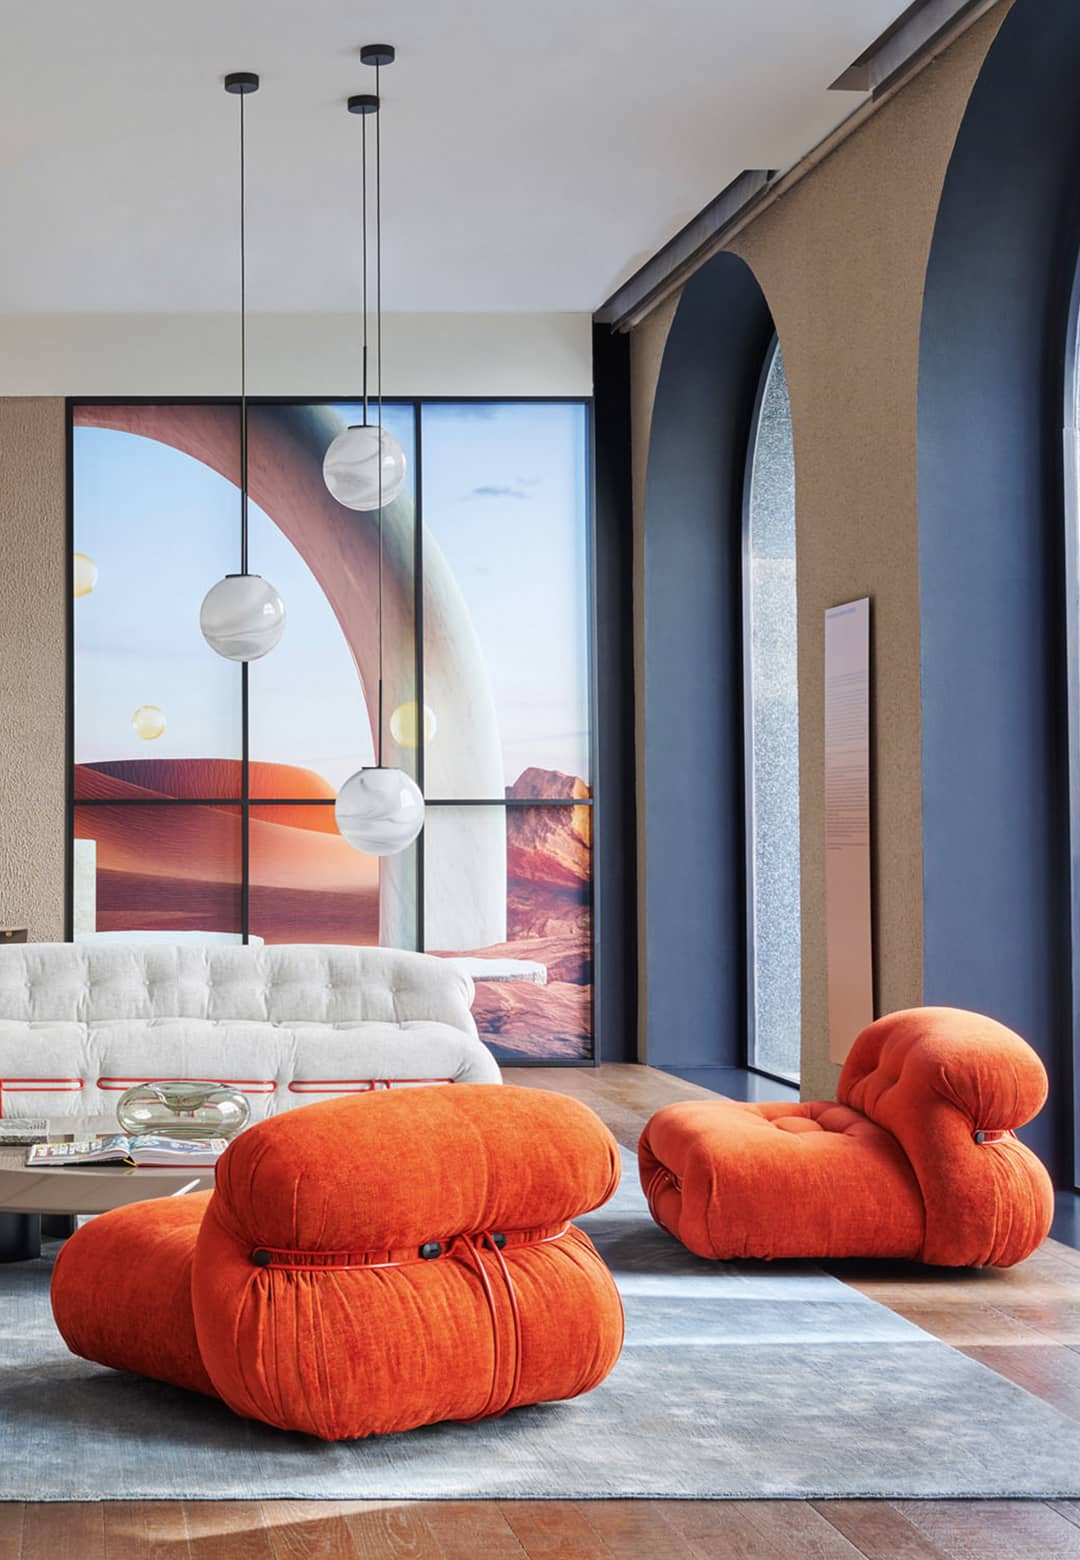 Cassina's new 2021 collection unveiled at London Design Festival